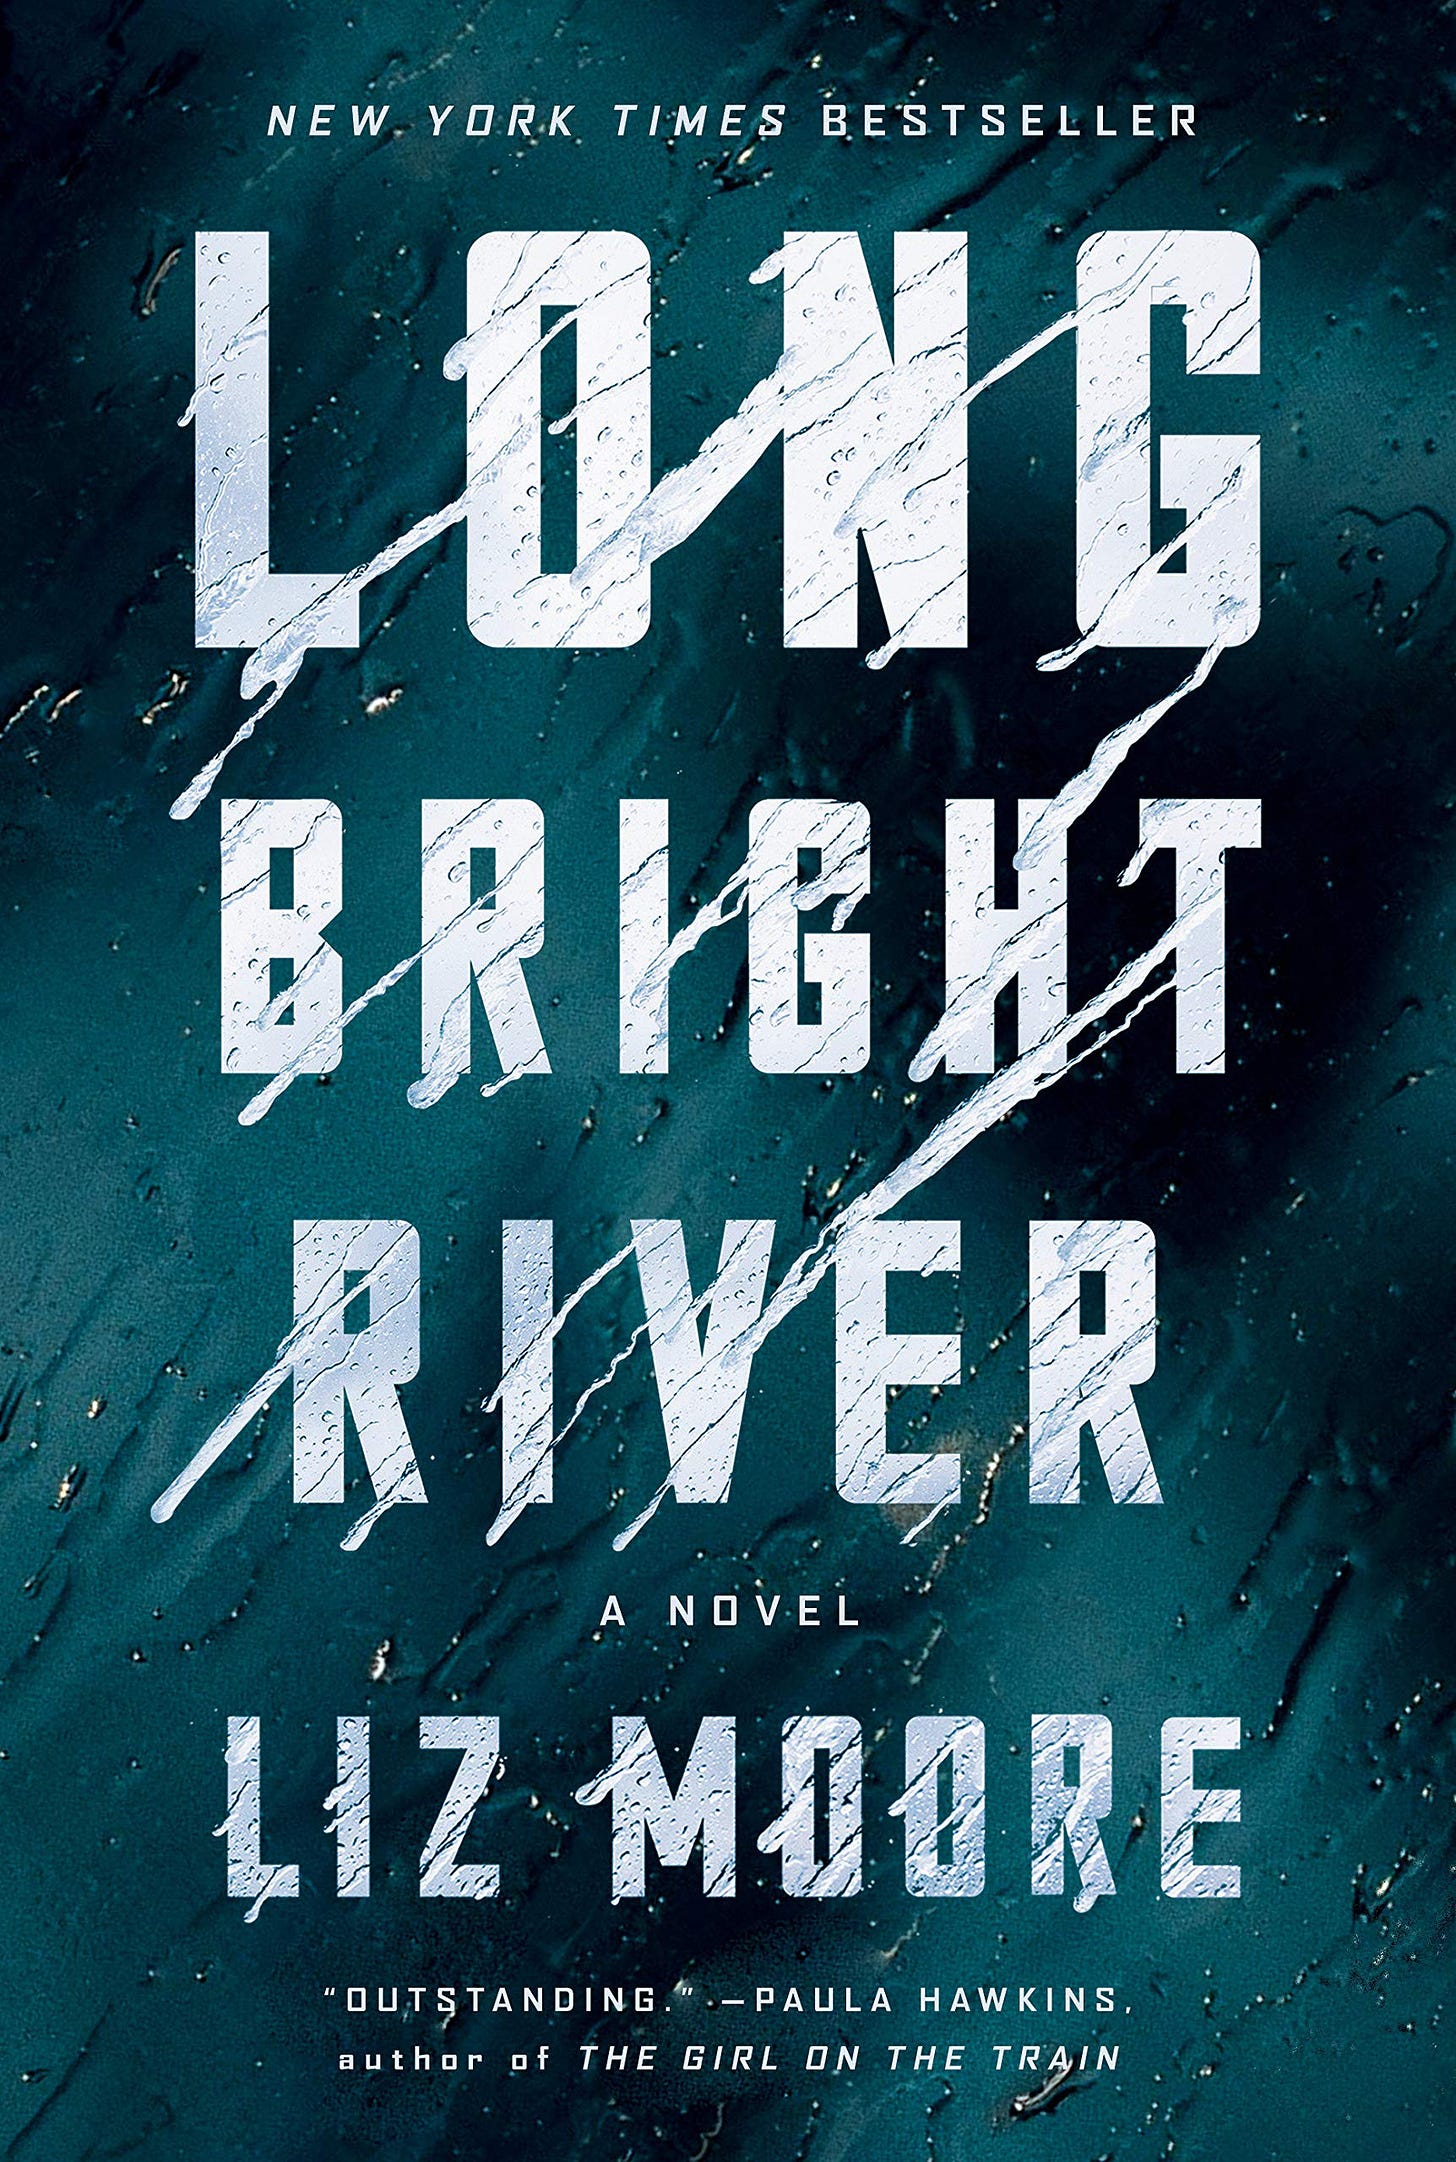 Book cover for Long Bright River